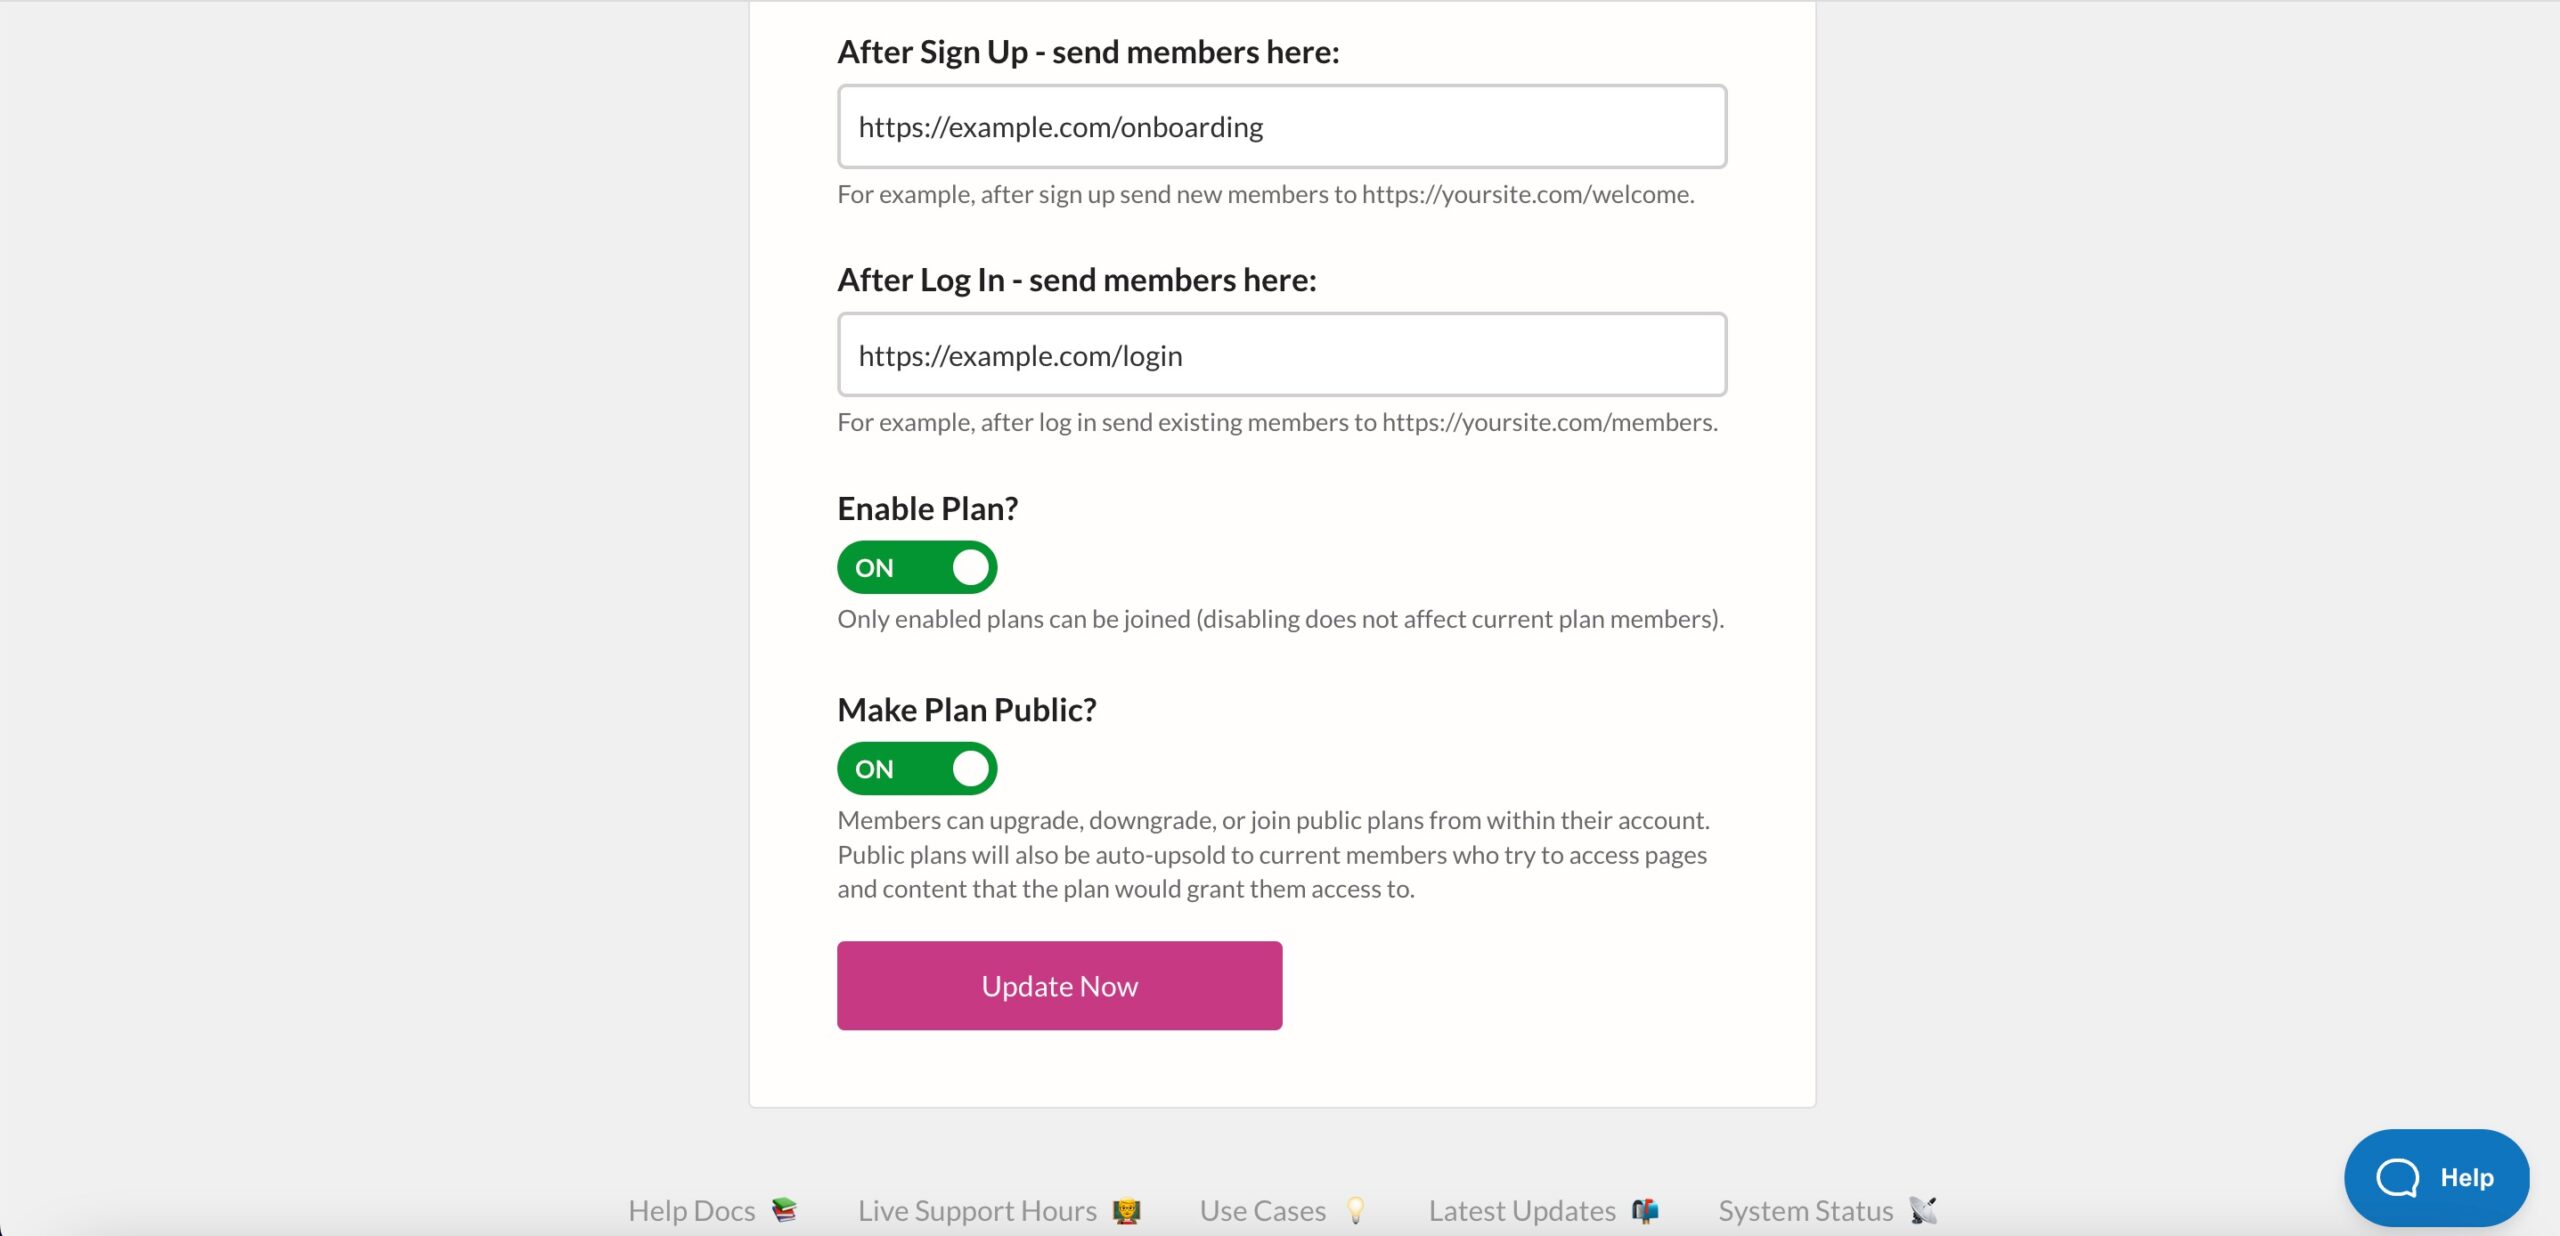 Automatically send new members to the onboarding process page